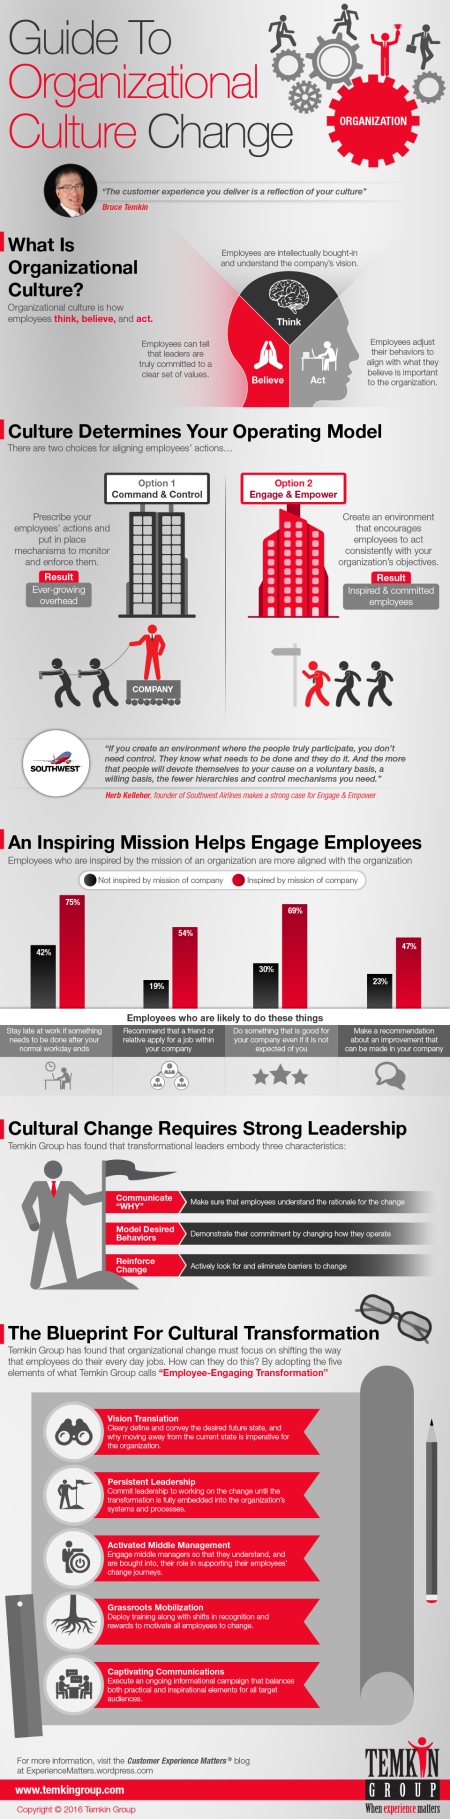 guide-to-organizational-culture-change